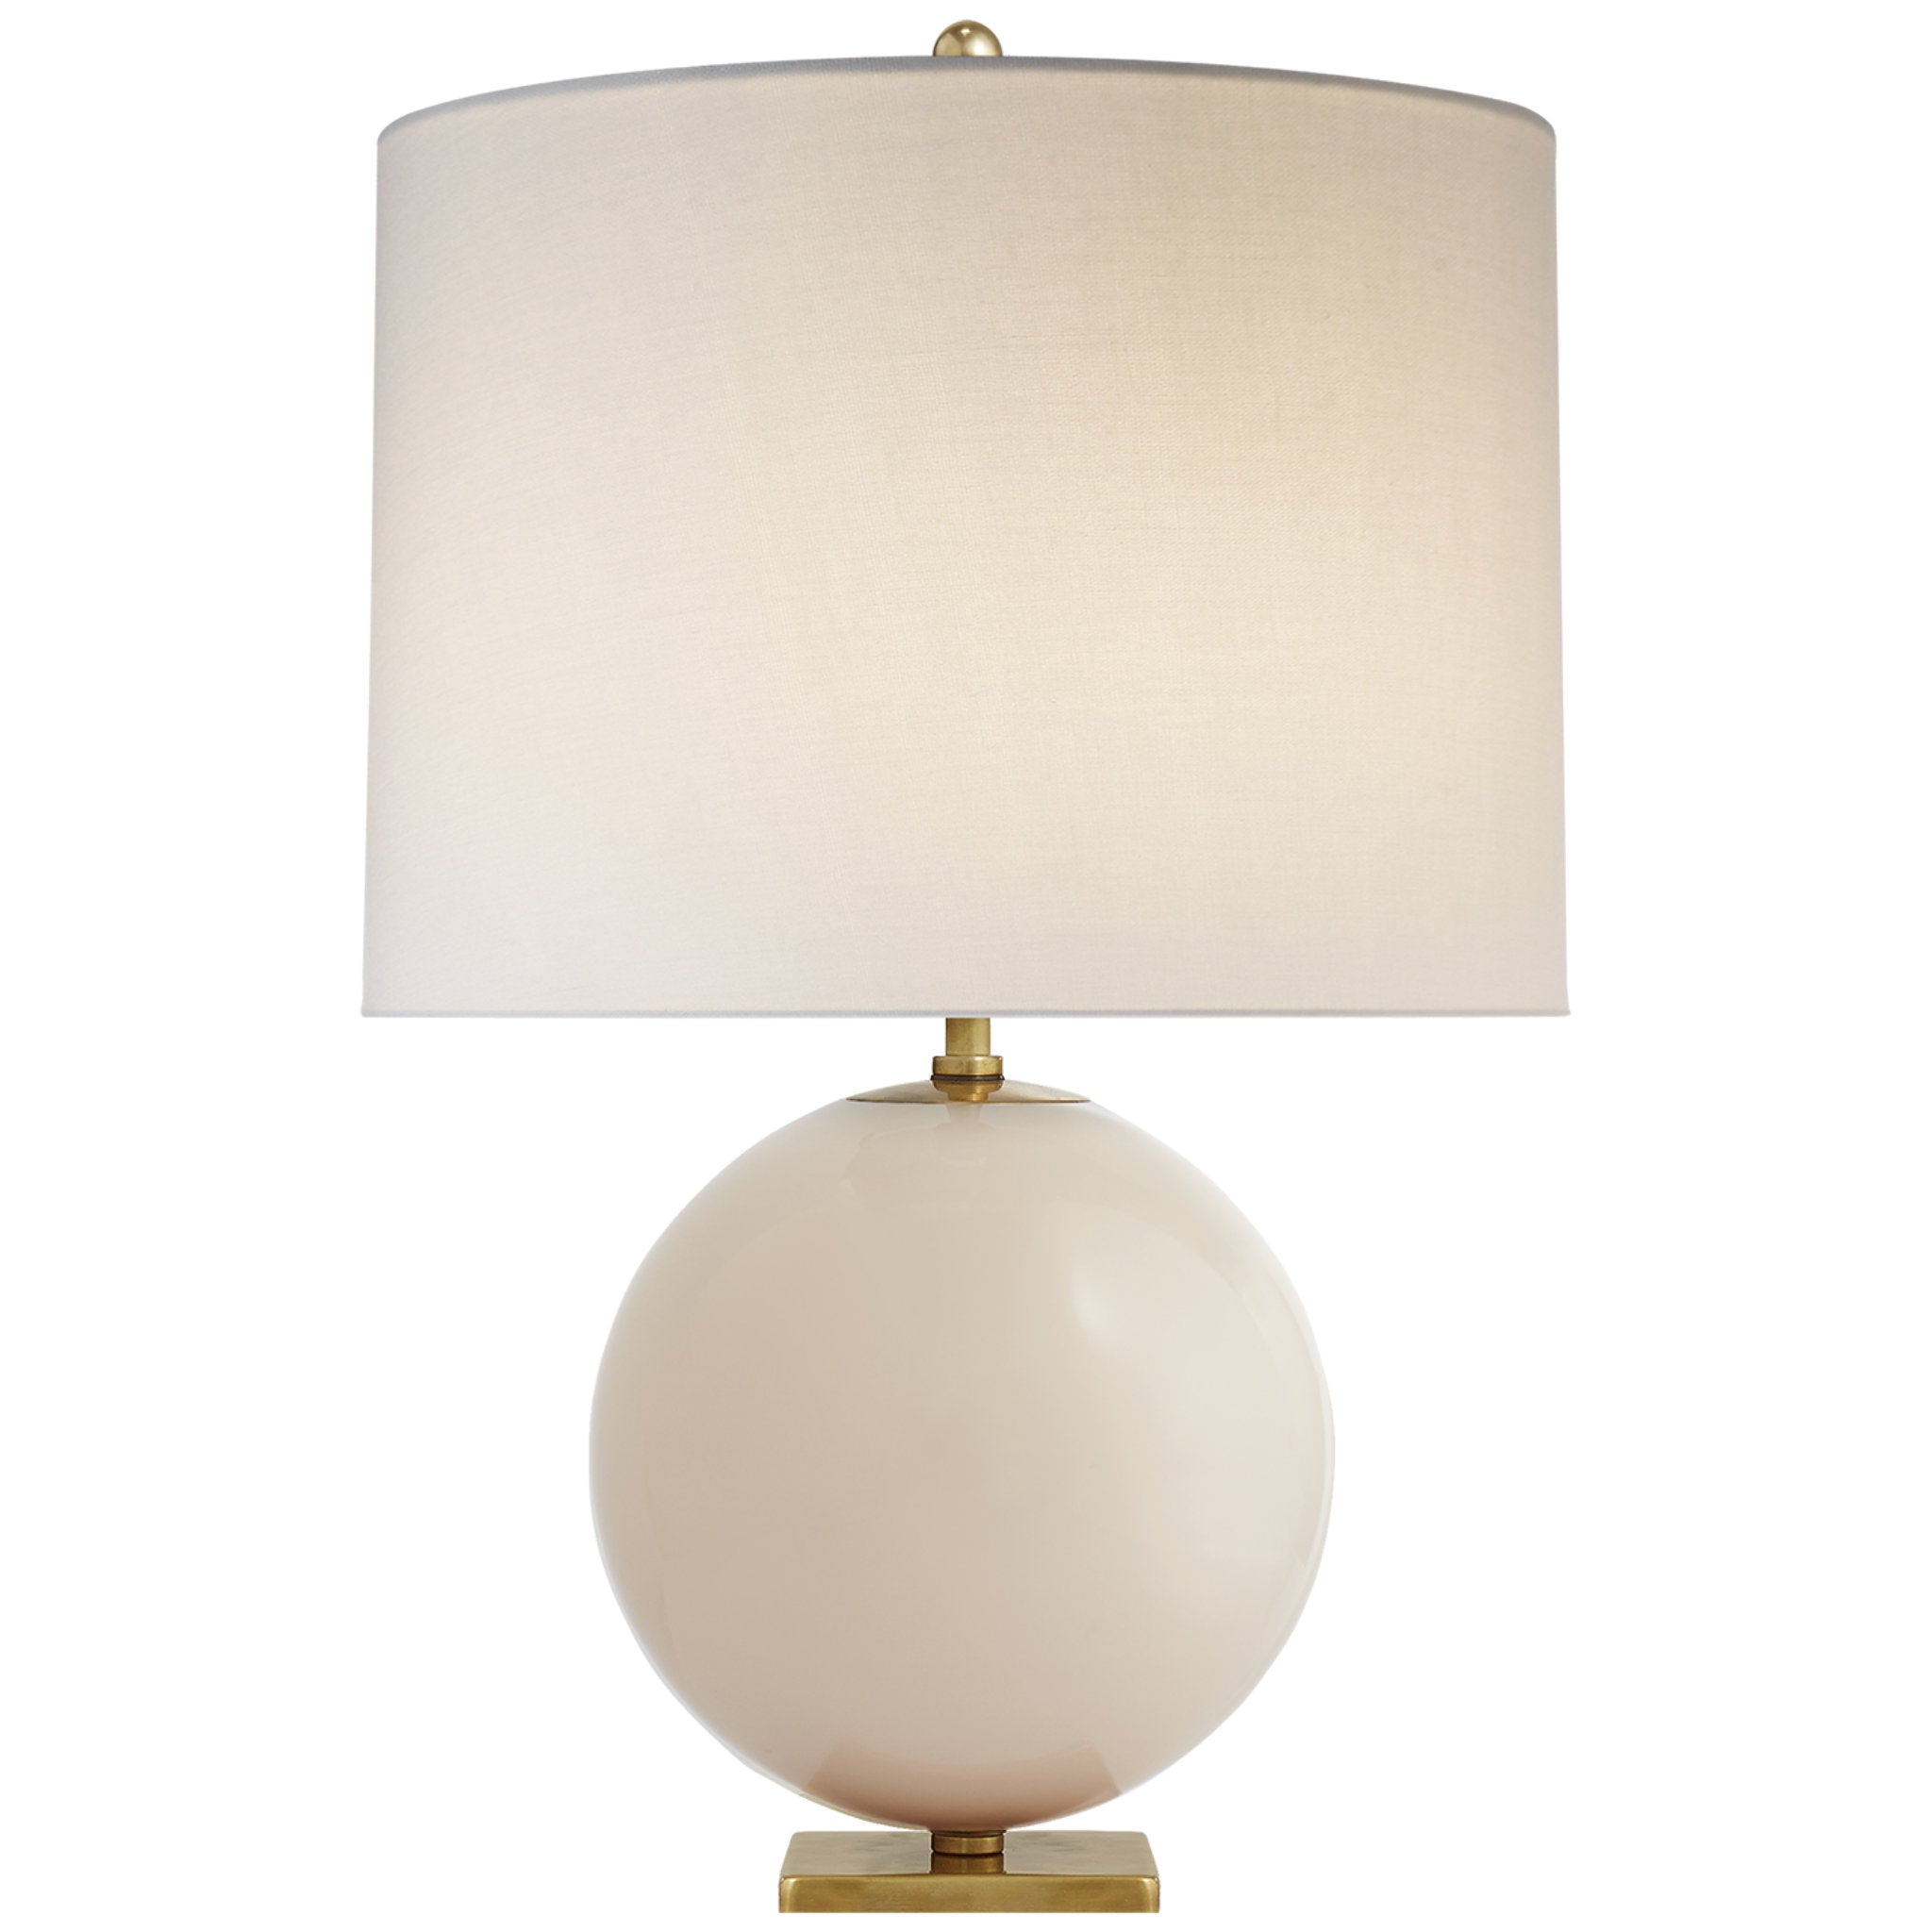 kate spade new york Elsie Table Lamp in Blush Painted Glass with Cream Linen Shade